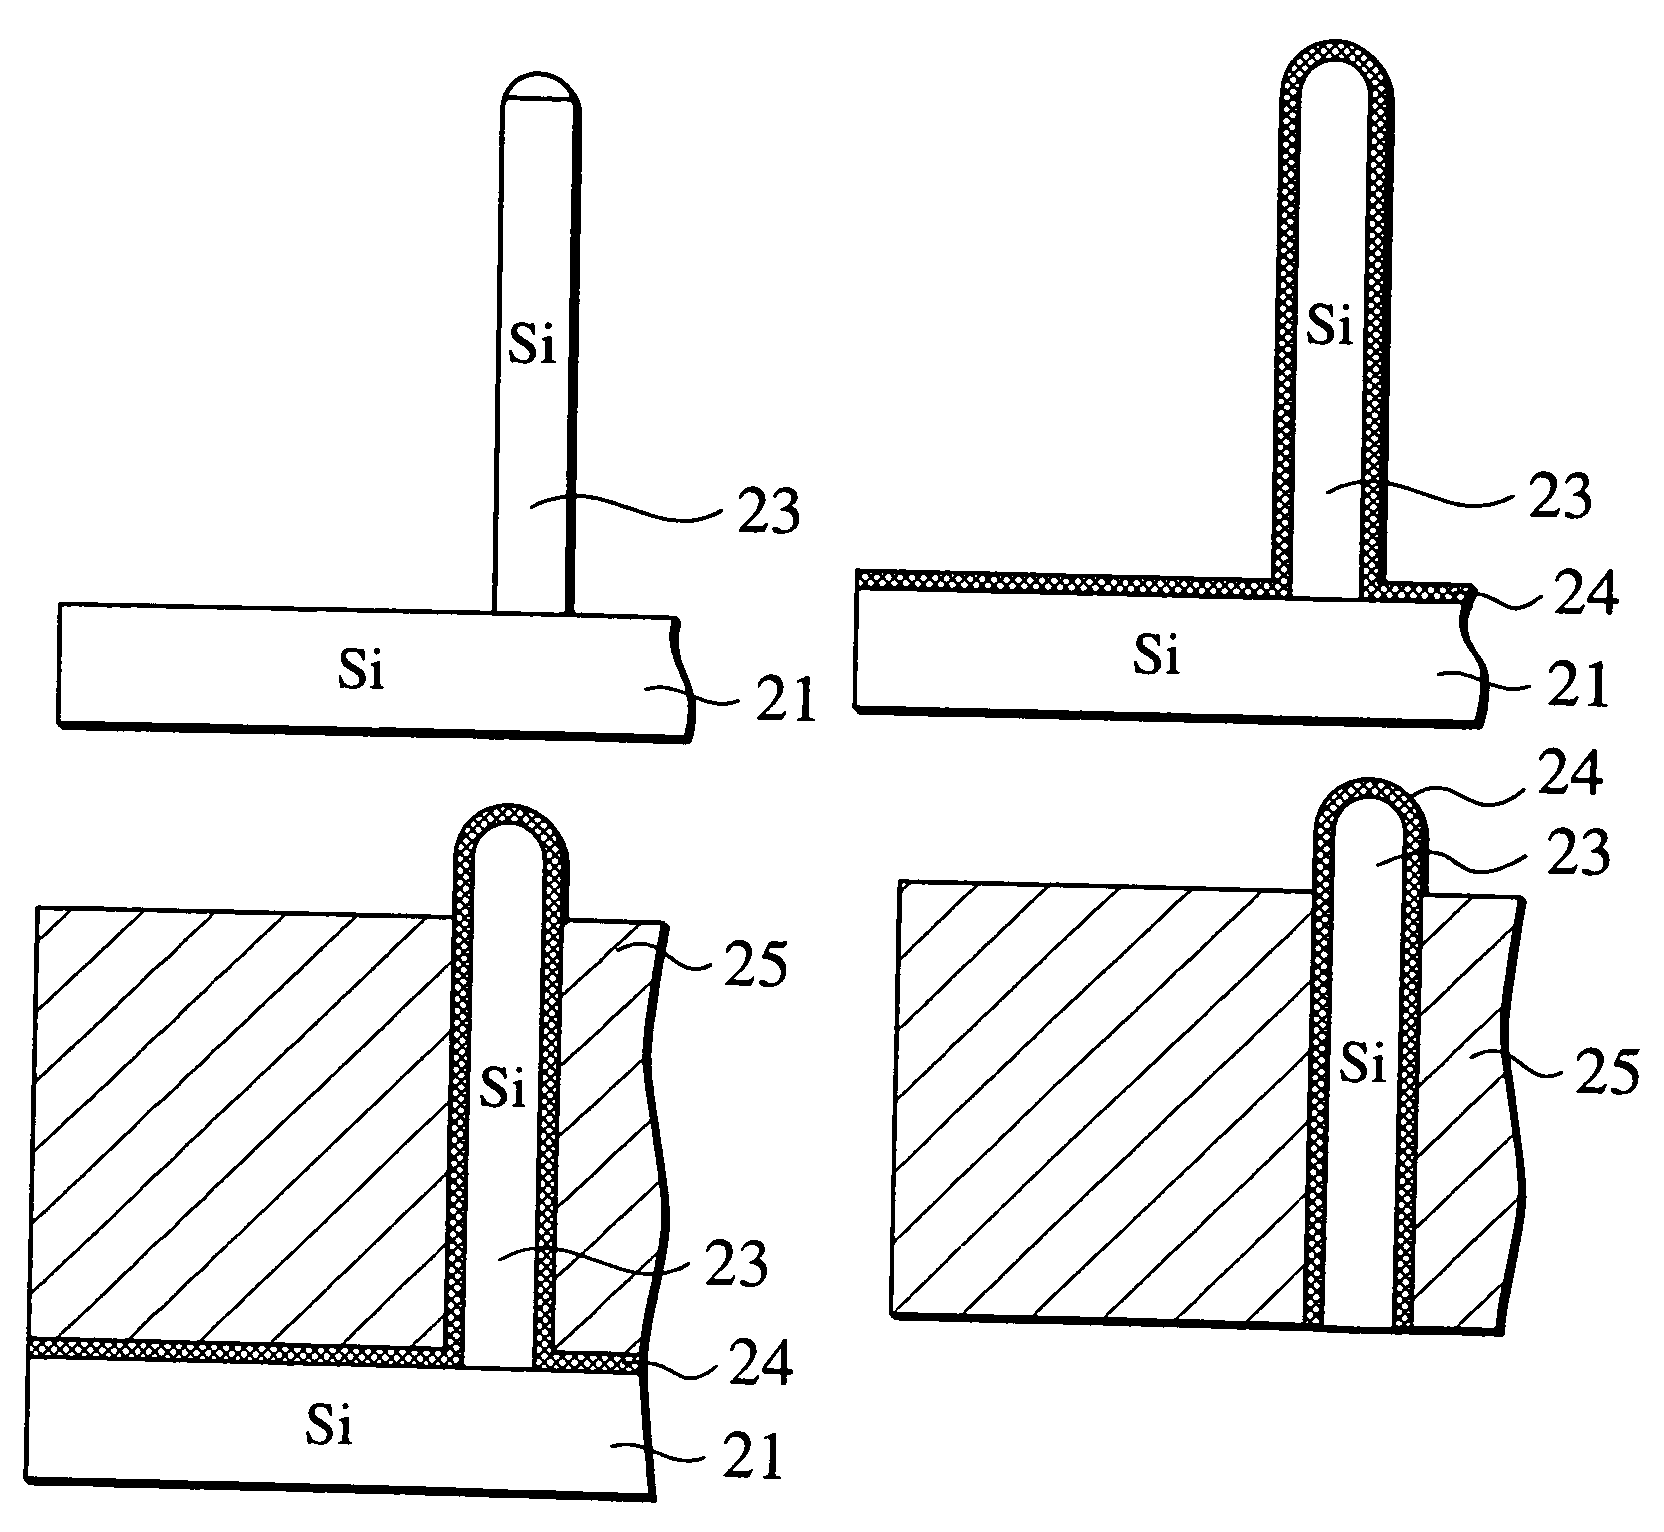 Method for fabricating a probe pin for testing electrical characteristics of an apparatus